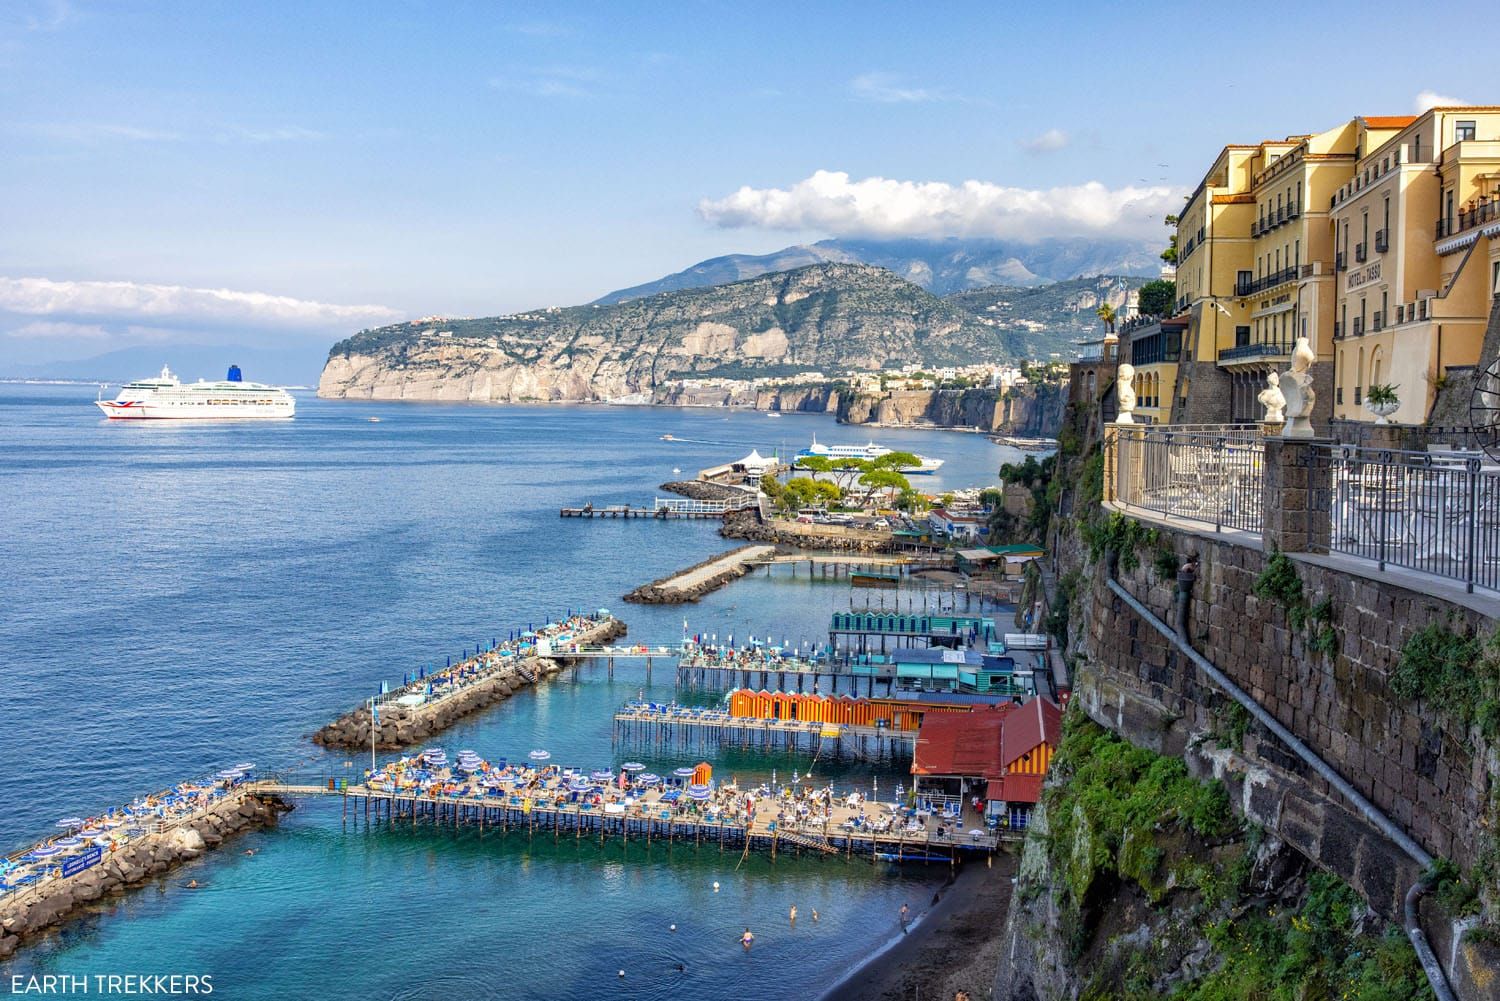 Where to Stay in Sorrento | Where to Stay on the Amalfi Coast